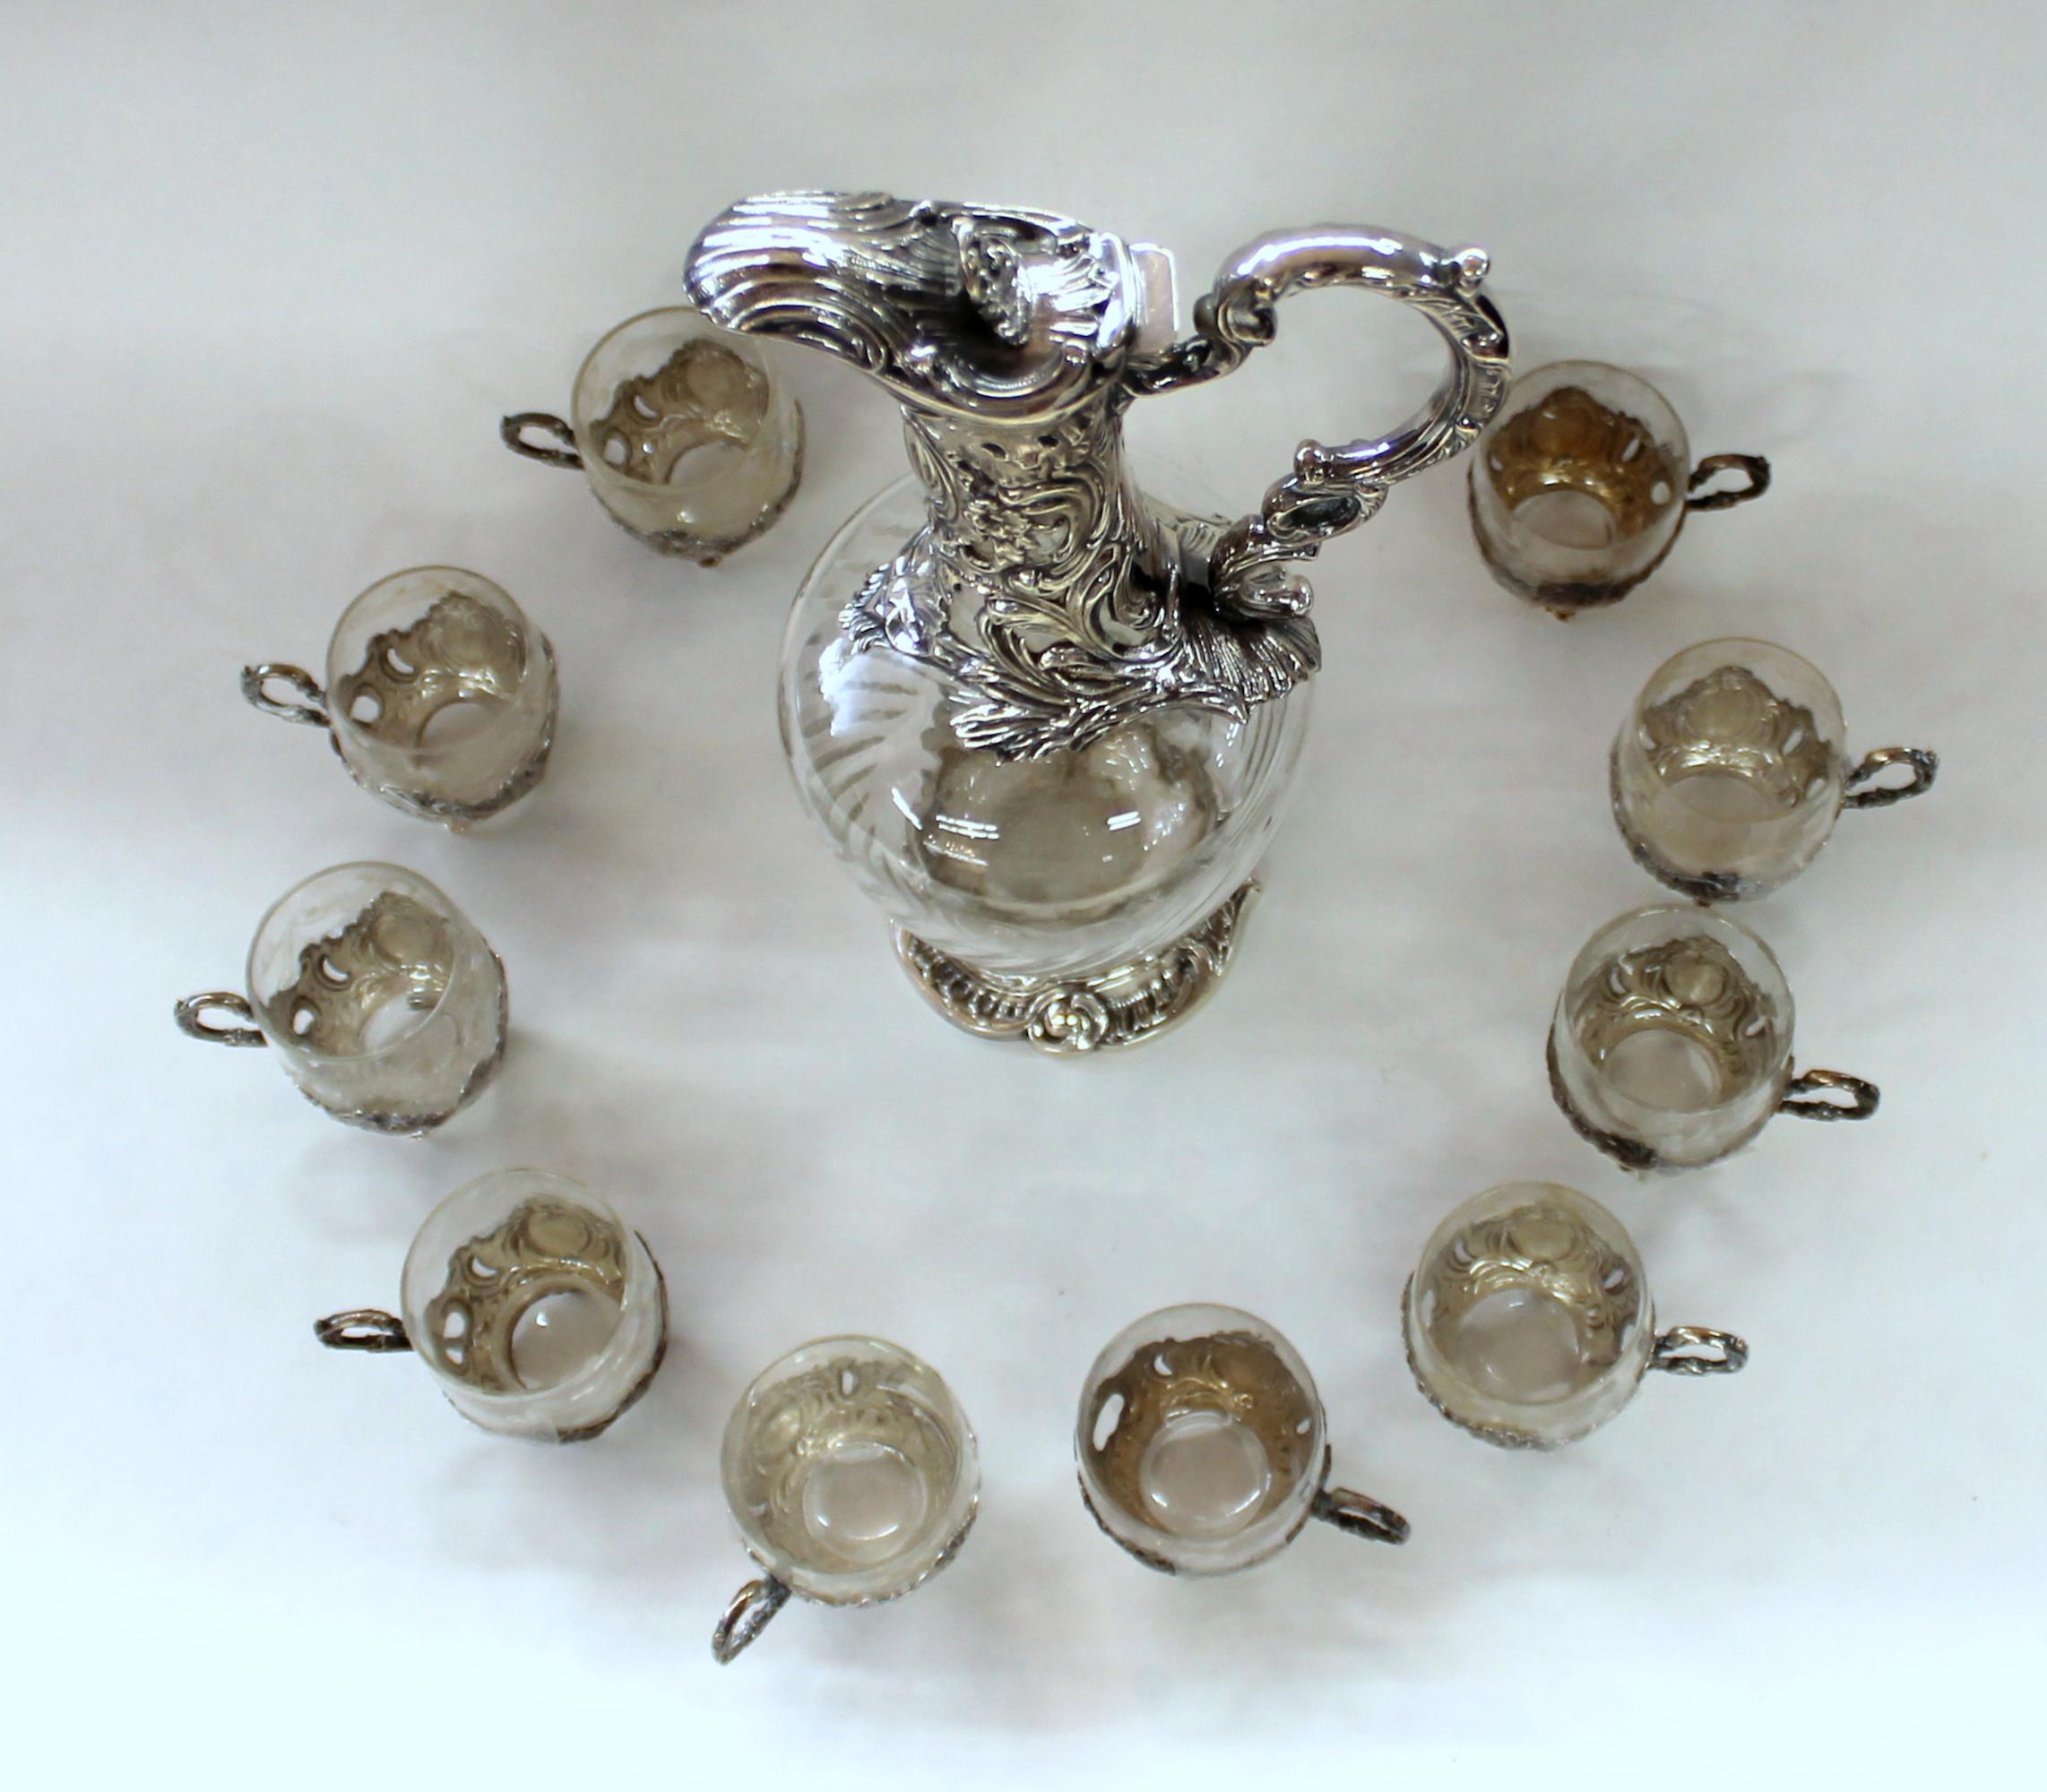 Rare and fine antique French .950 fine silver and hand-cut crystal 11 pc. Liqueur or cordial set (includes 10 hand cut crystal liqueur glasses in their original .950 fine hallmarked silver sleeves and one exceptional cordial decanter).

Any